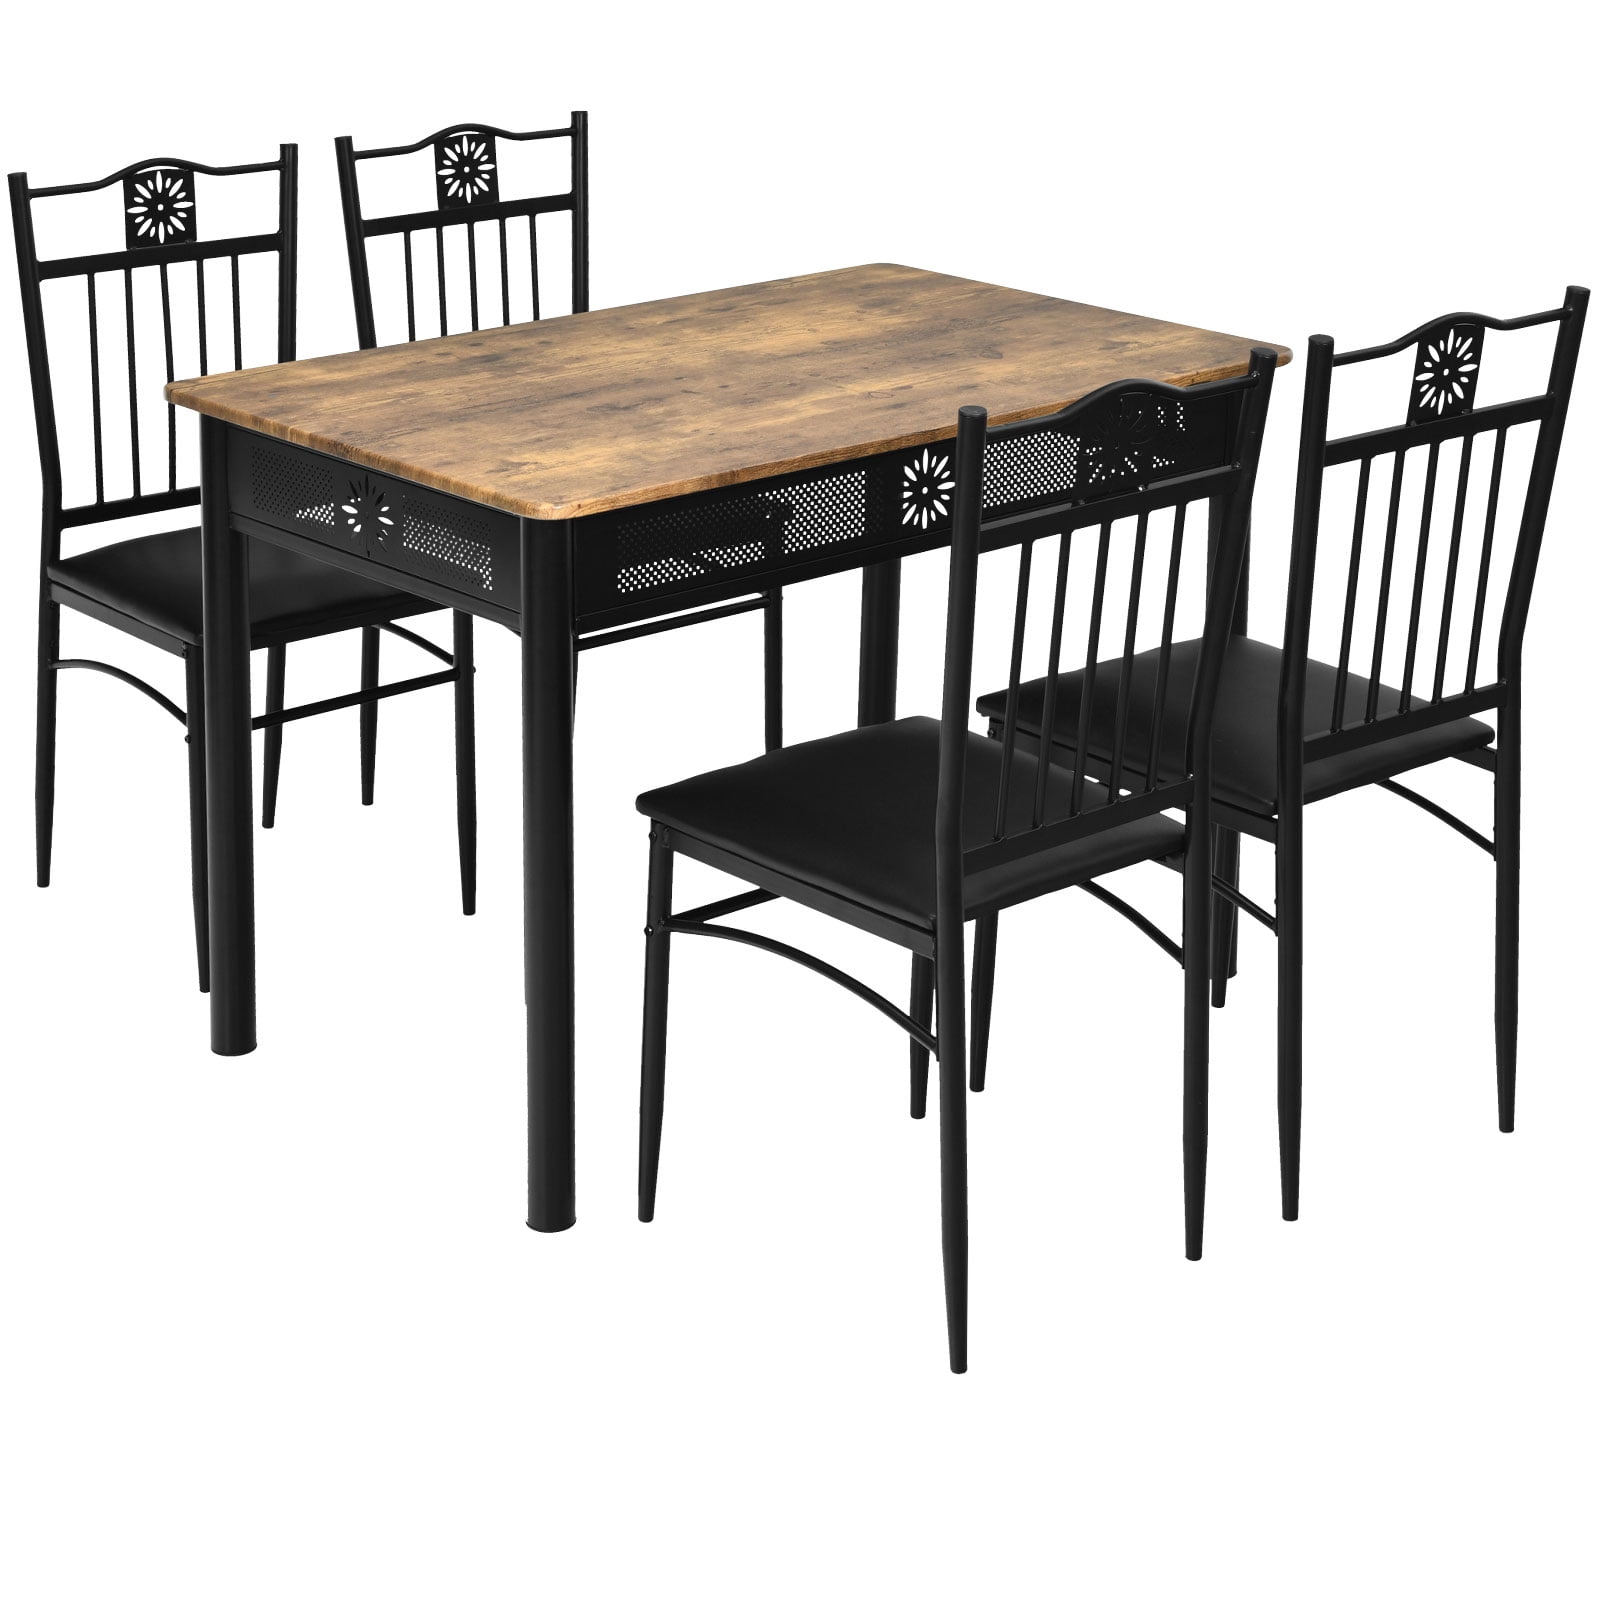 Topbuy 5 Piece Dining Set Wood Metal Table and Chairs Kitchen Furniture 